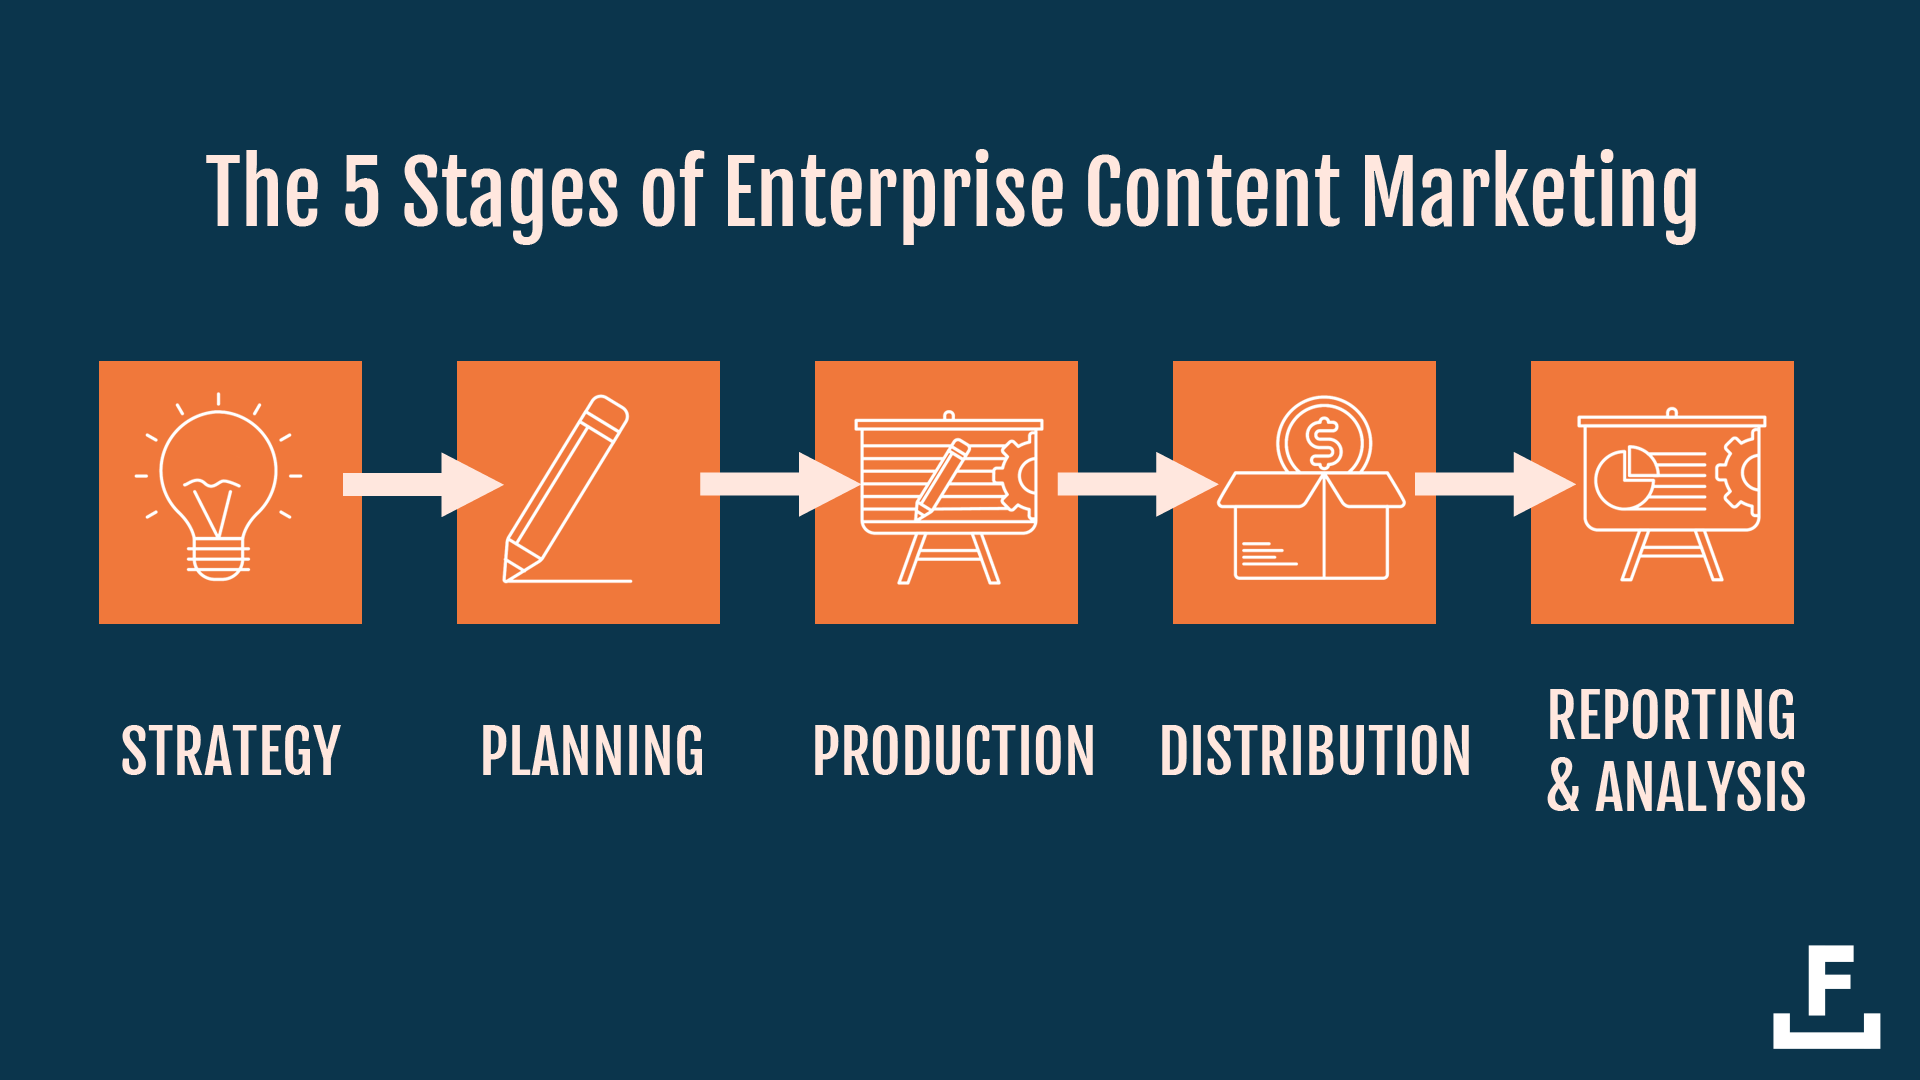 To product content at the enterprise level, you need to go through 5 stages: strategy, planning, production, distribution, and analysis